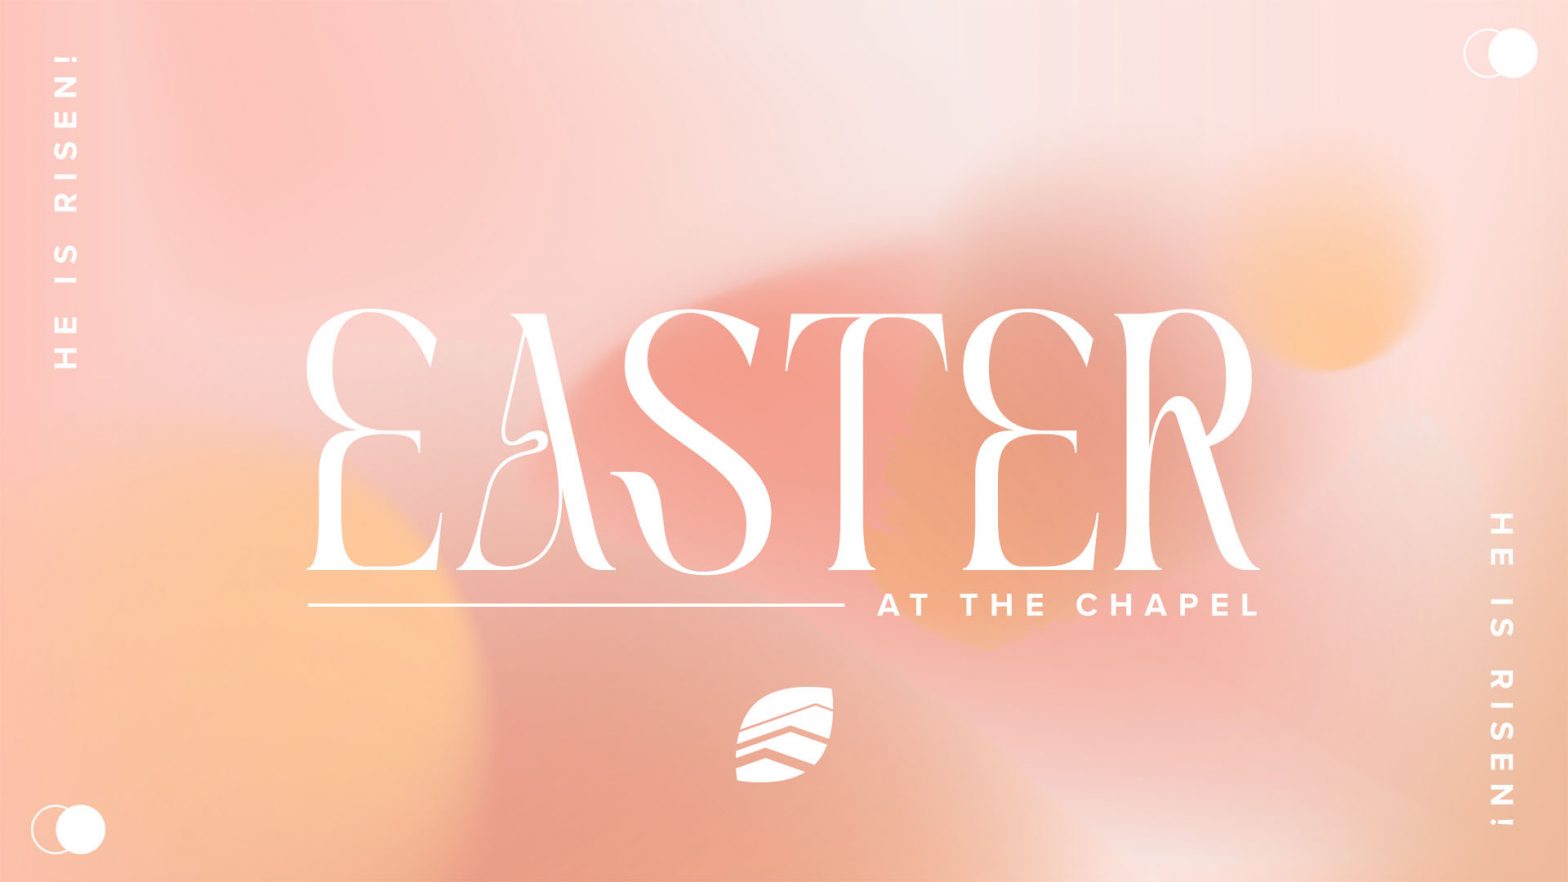 Easter at The Chapel image